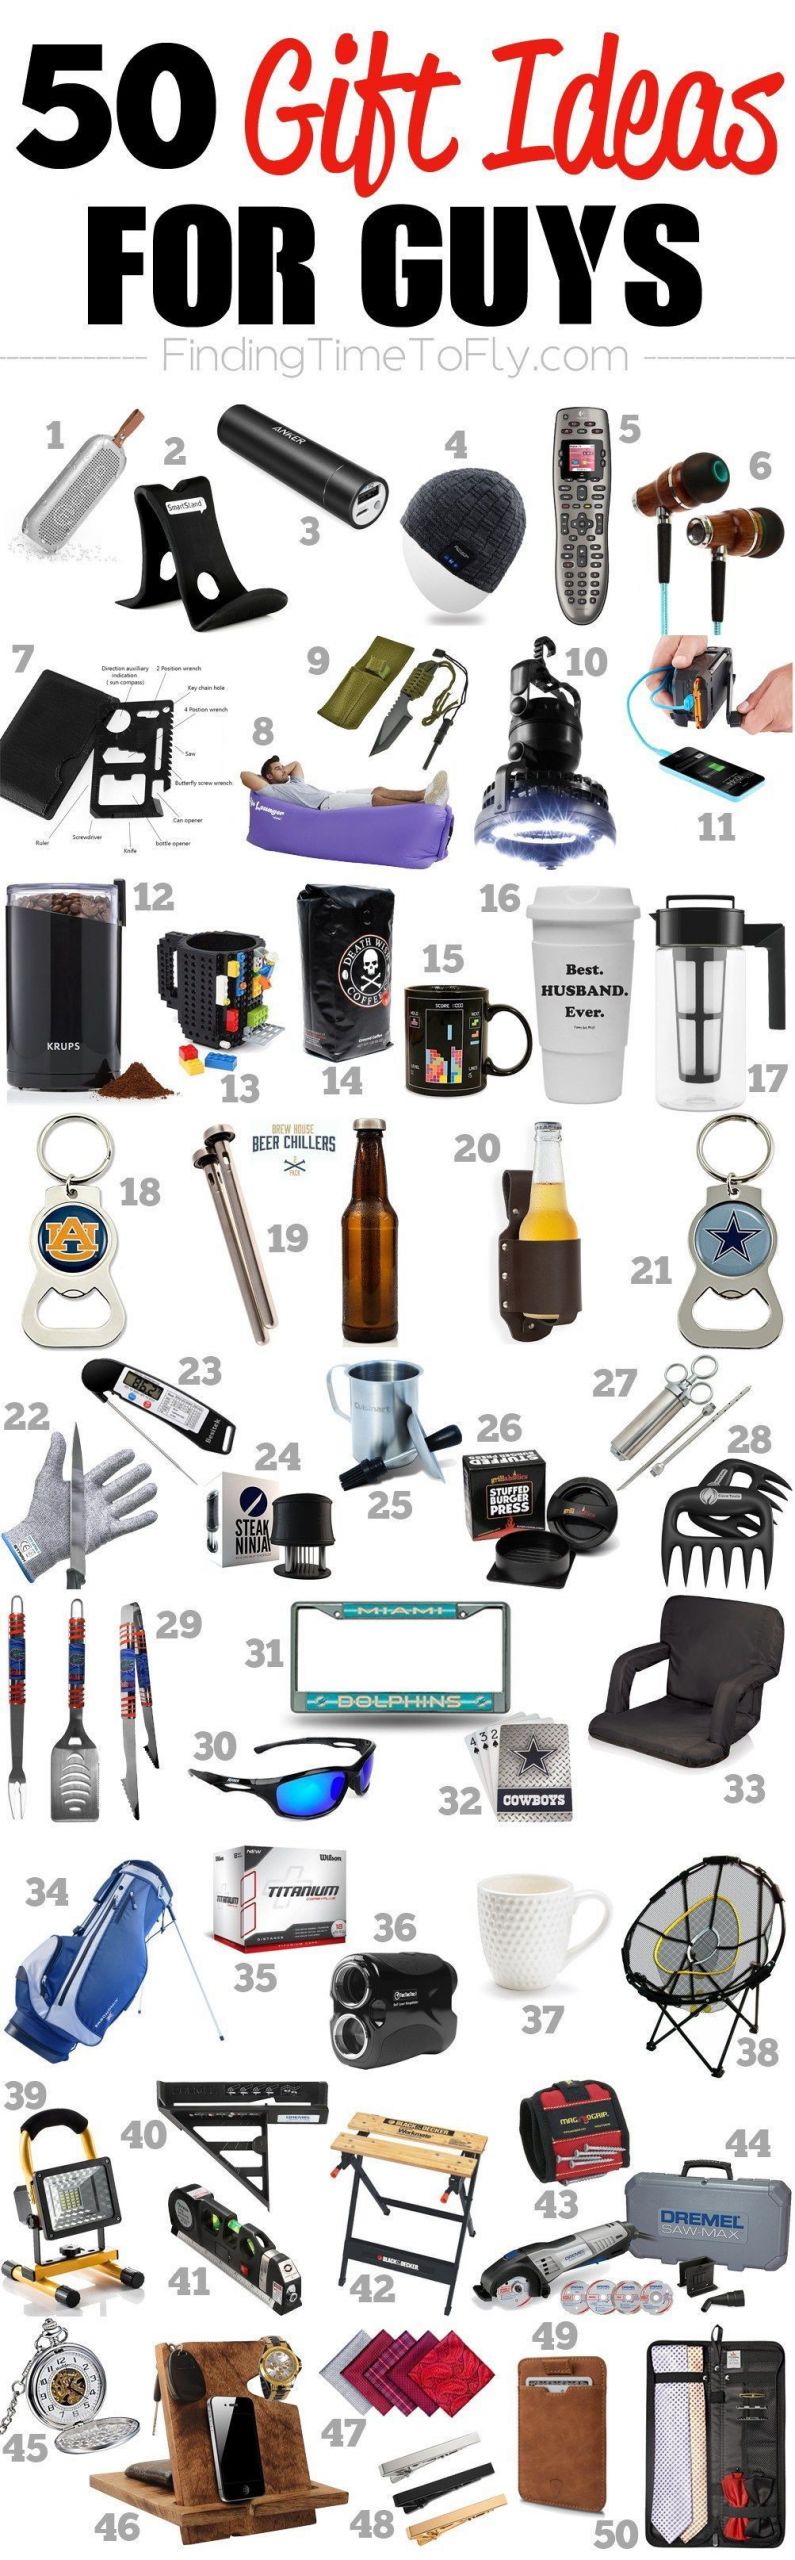 Good Valentines Gift Ideas For Men
 Saving this list of 50 Gifts for Guys A great list of